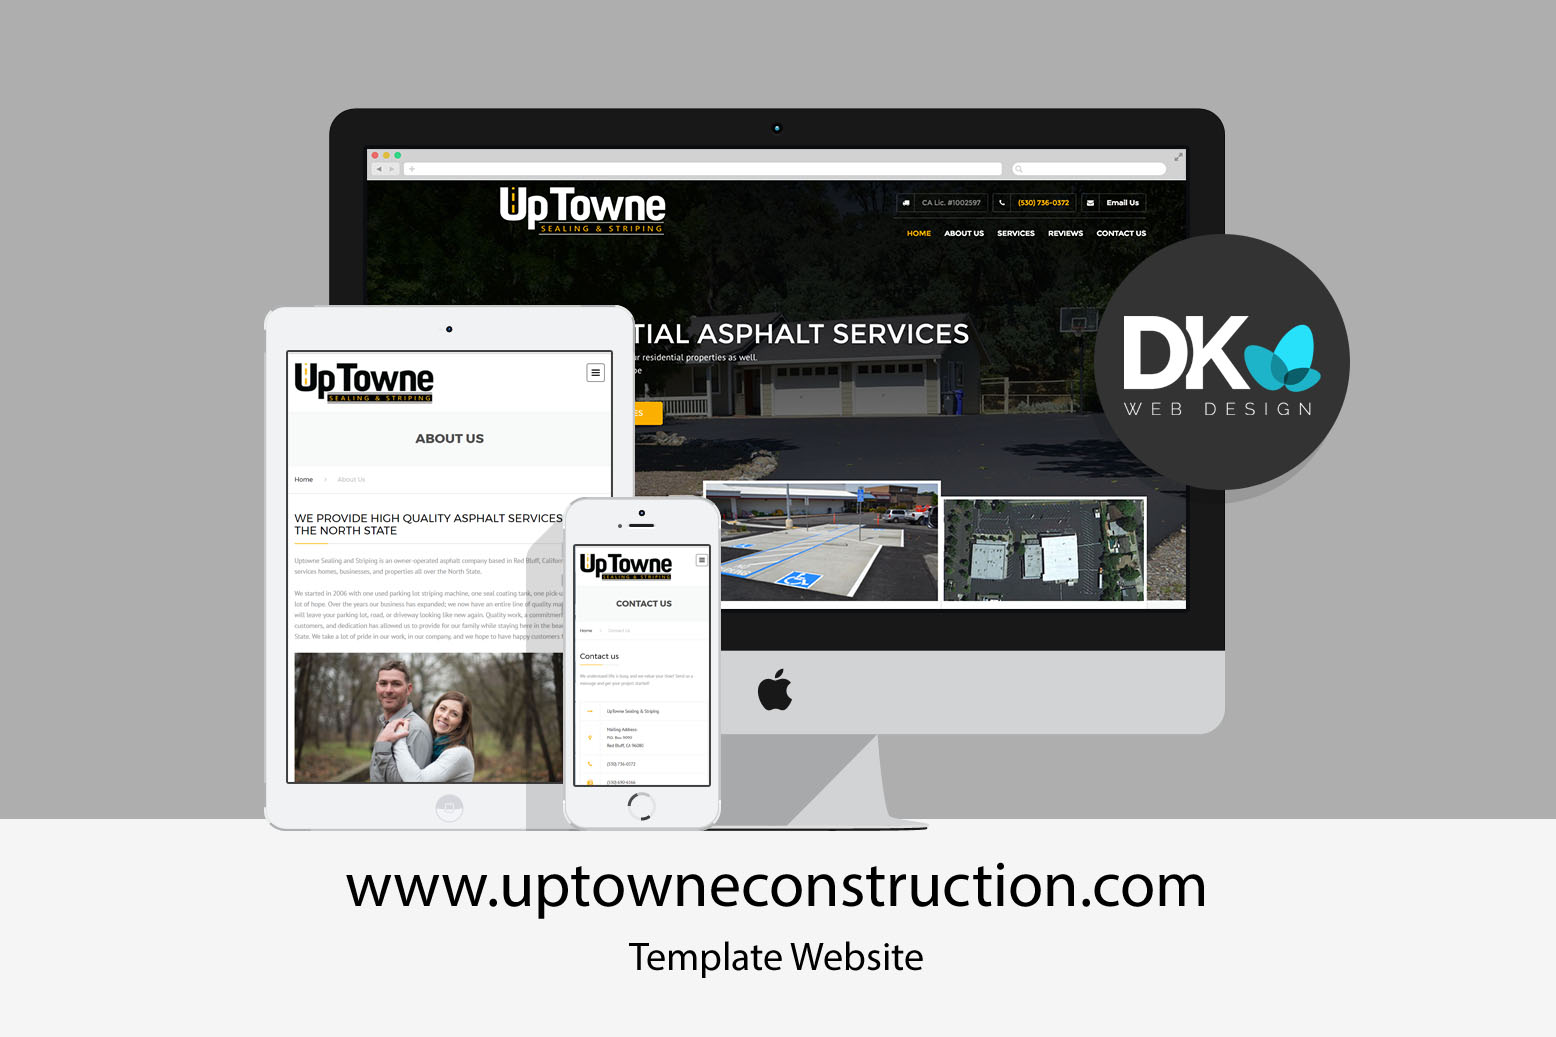 Showcase image for Uptowne website